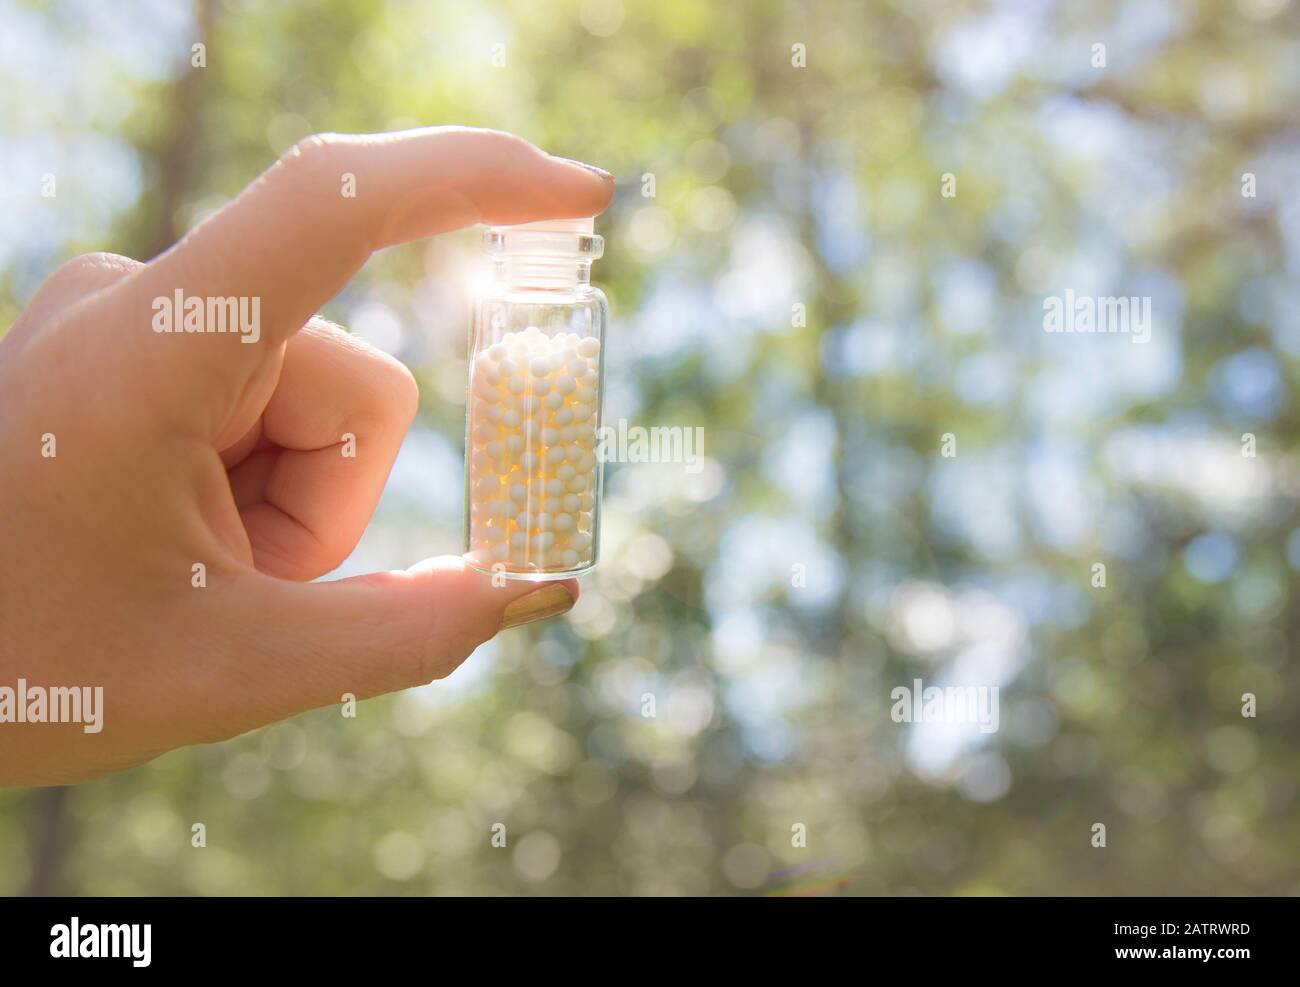 Selective focus on person hand holding glass jar full of small white round homeopathy pills against bokeh forest nature background in summer. Stock Photo